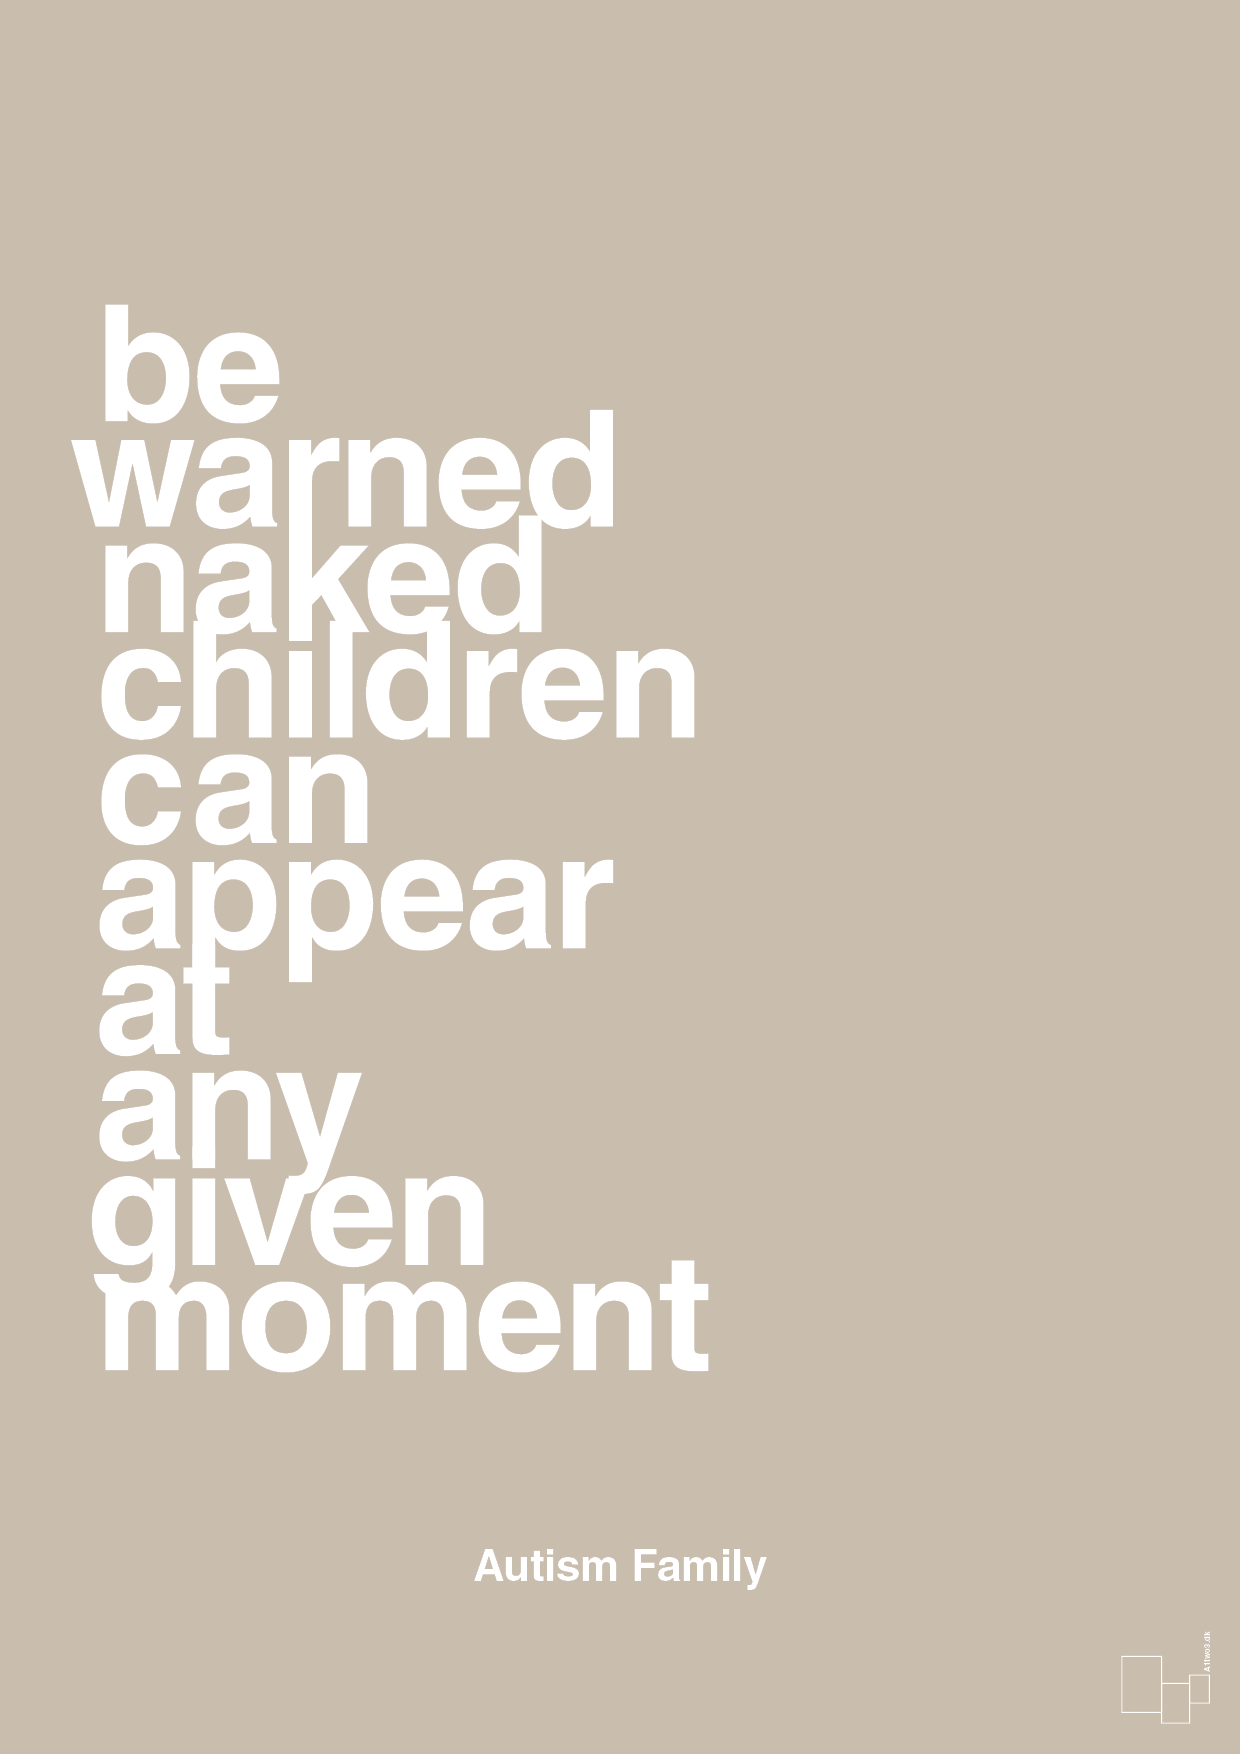 be warned naked children can appear at any given moment - Plakat med Samfund i Creamy Mushroom